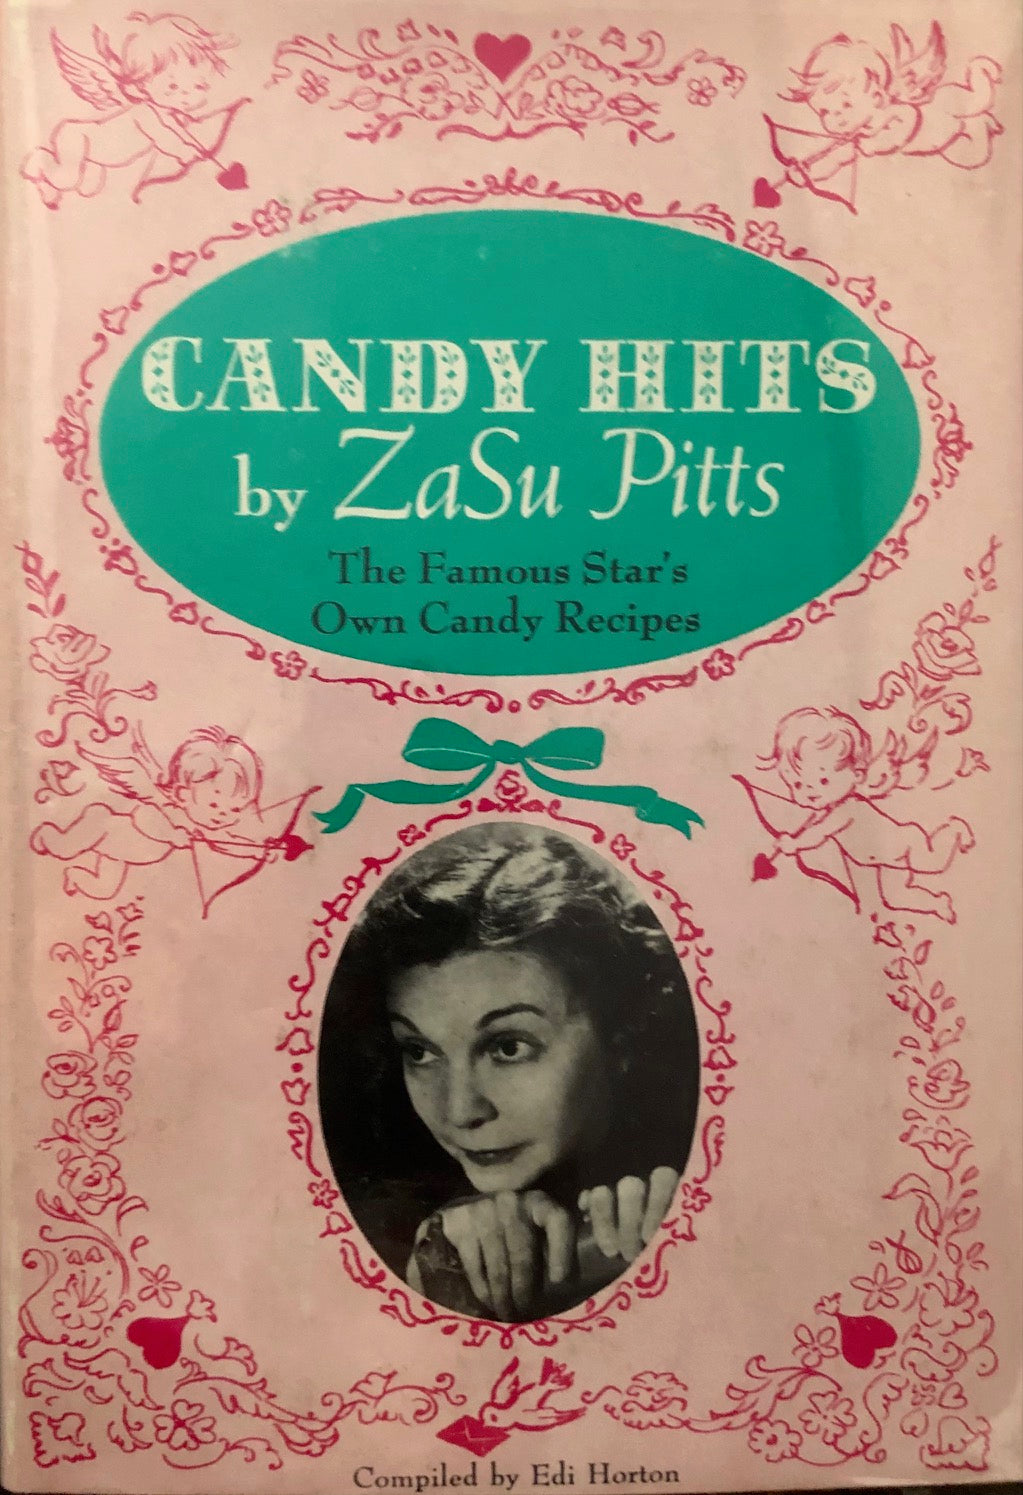 (Celebrity) Zasu Pitts. Candy Hits by Zasu Pitts: The Famouse Star's Own Candy Recipes.